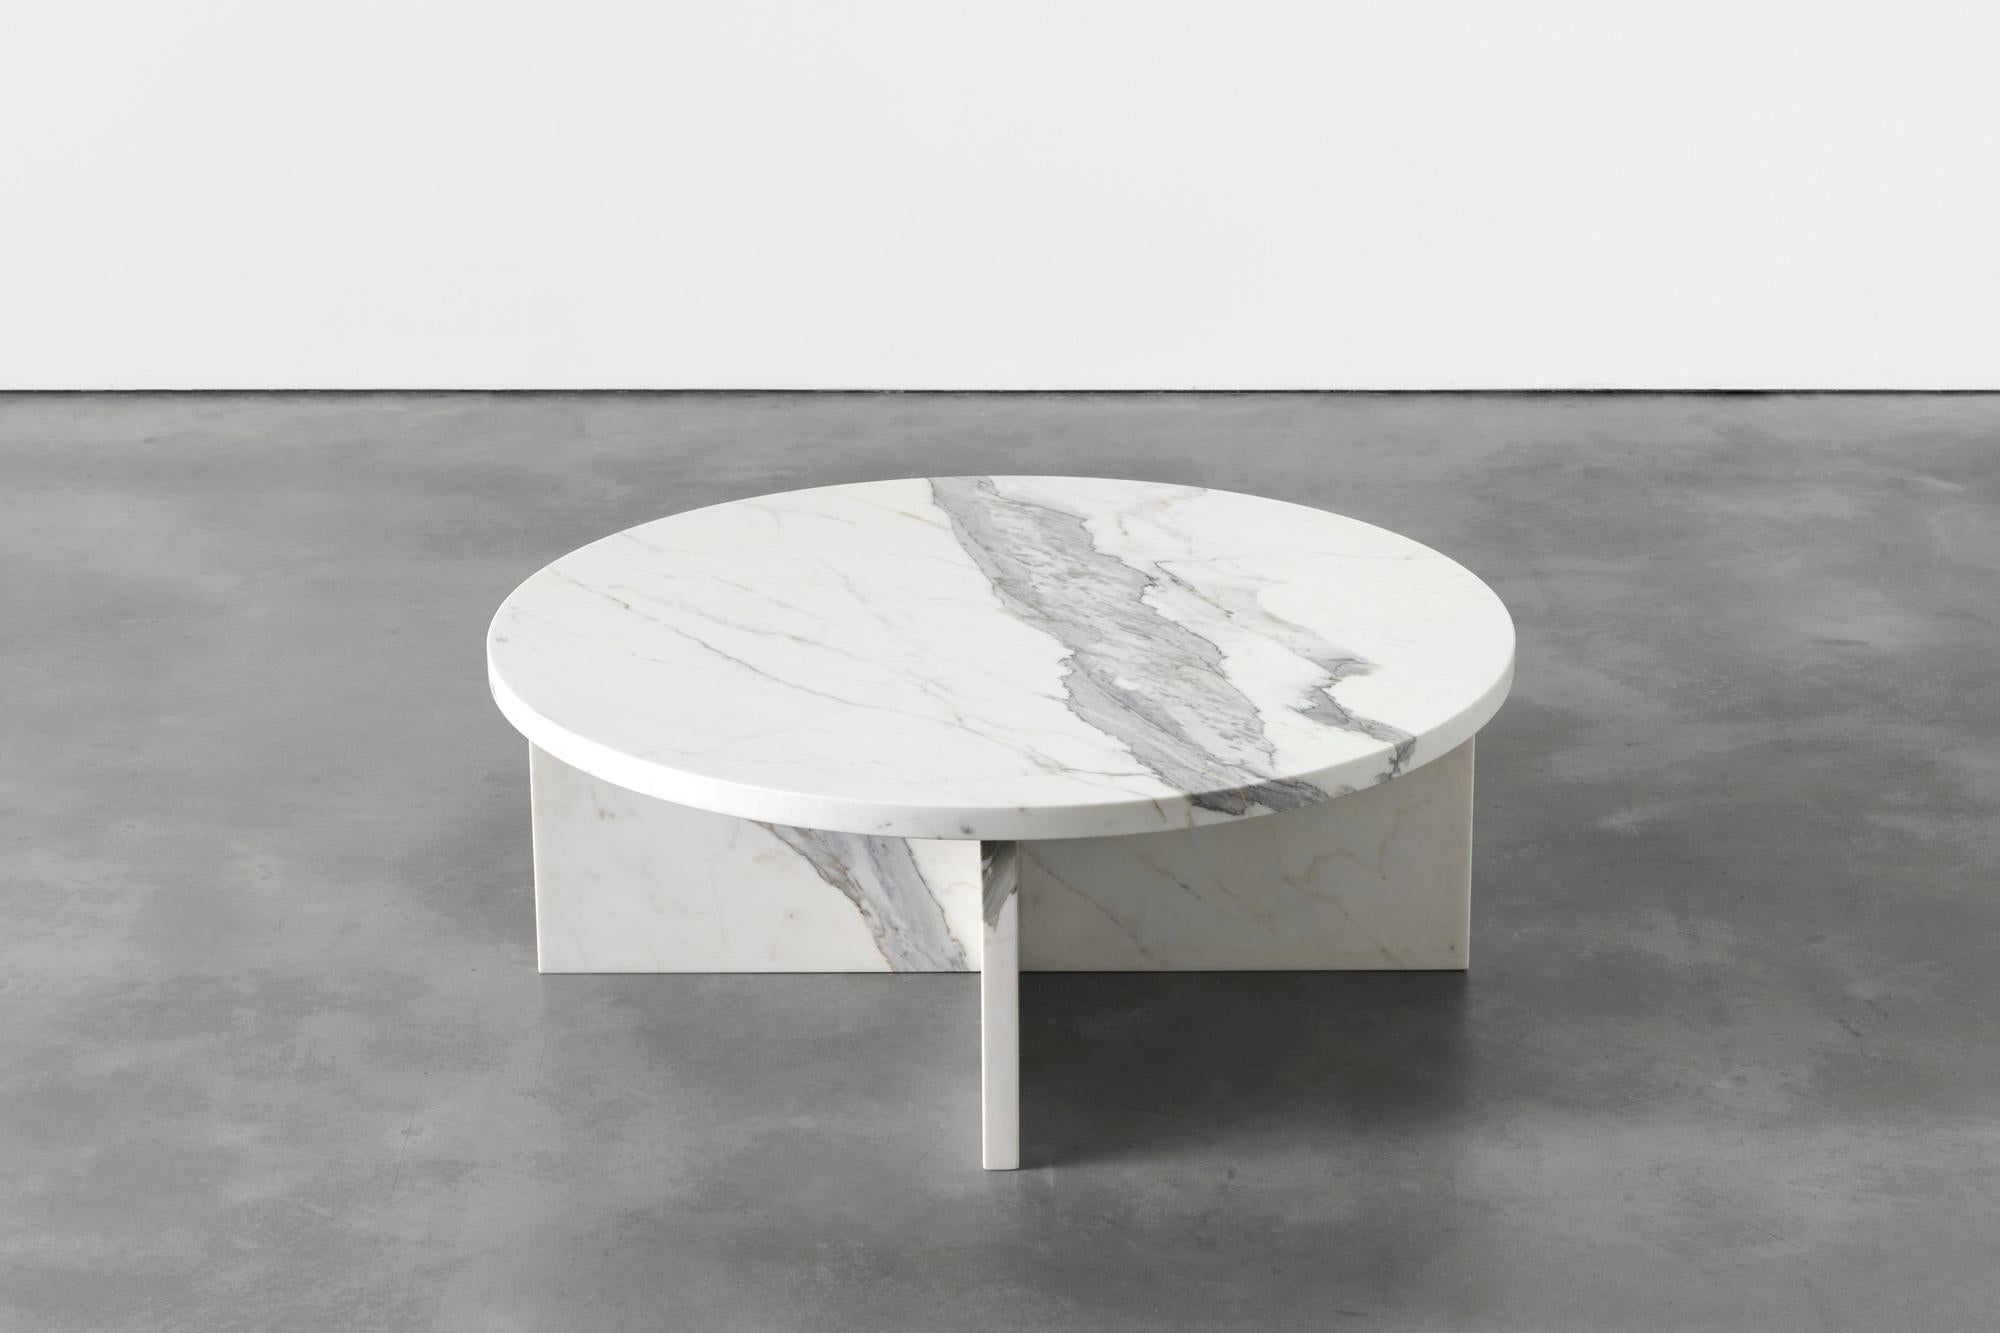 Rosa marble coffee table by Agglomerati
Dimensions: D 90 x H 33 cm
Materials: Statuario marble
Available in other stones.

Rosa Coffee Table celebrates simplicity. It has striking geometric proportions that generate a harmonious